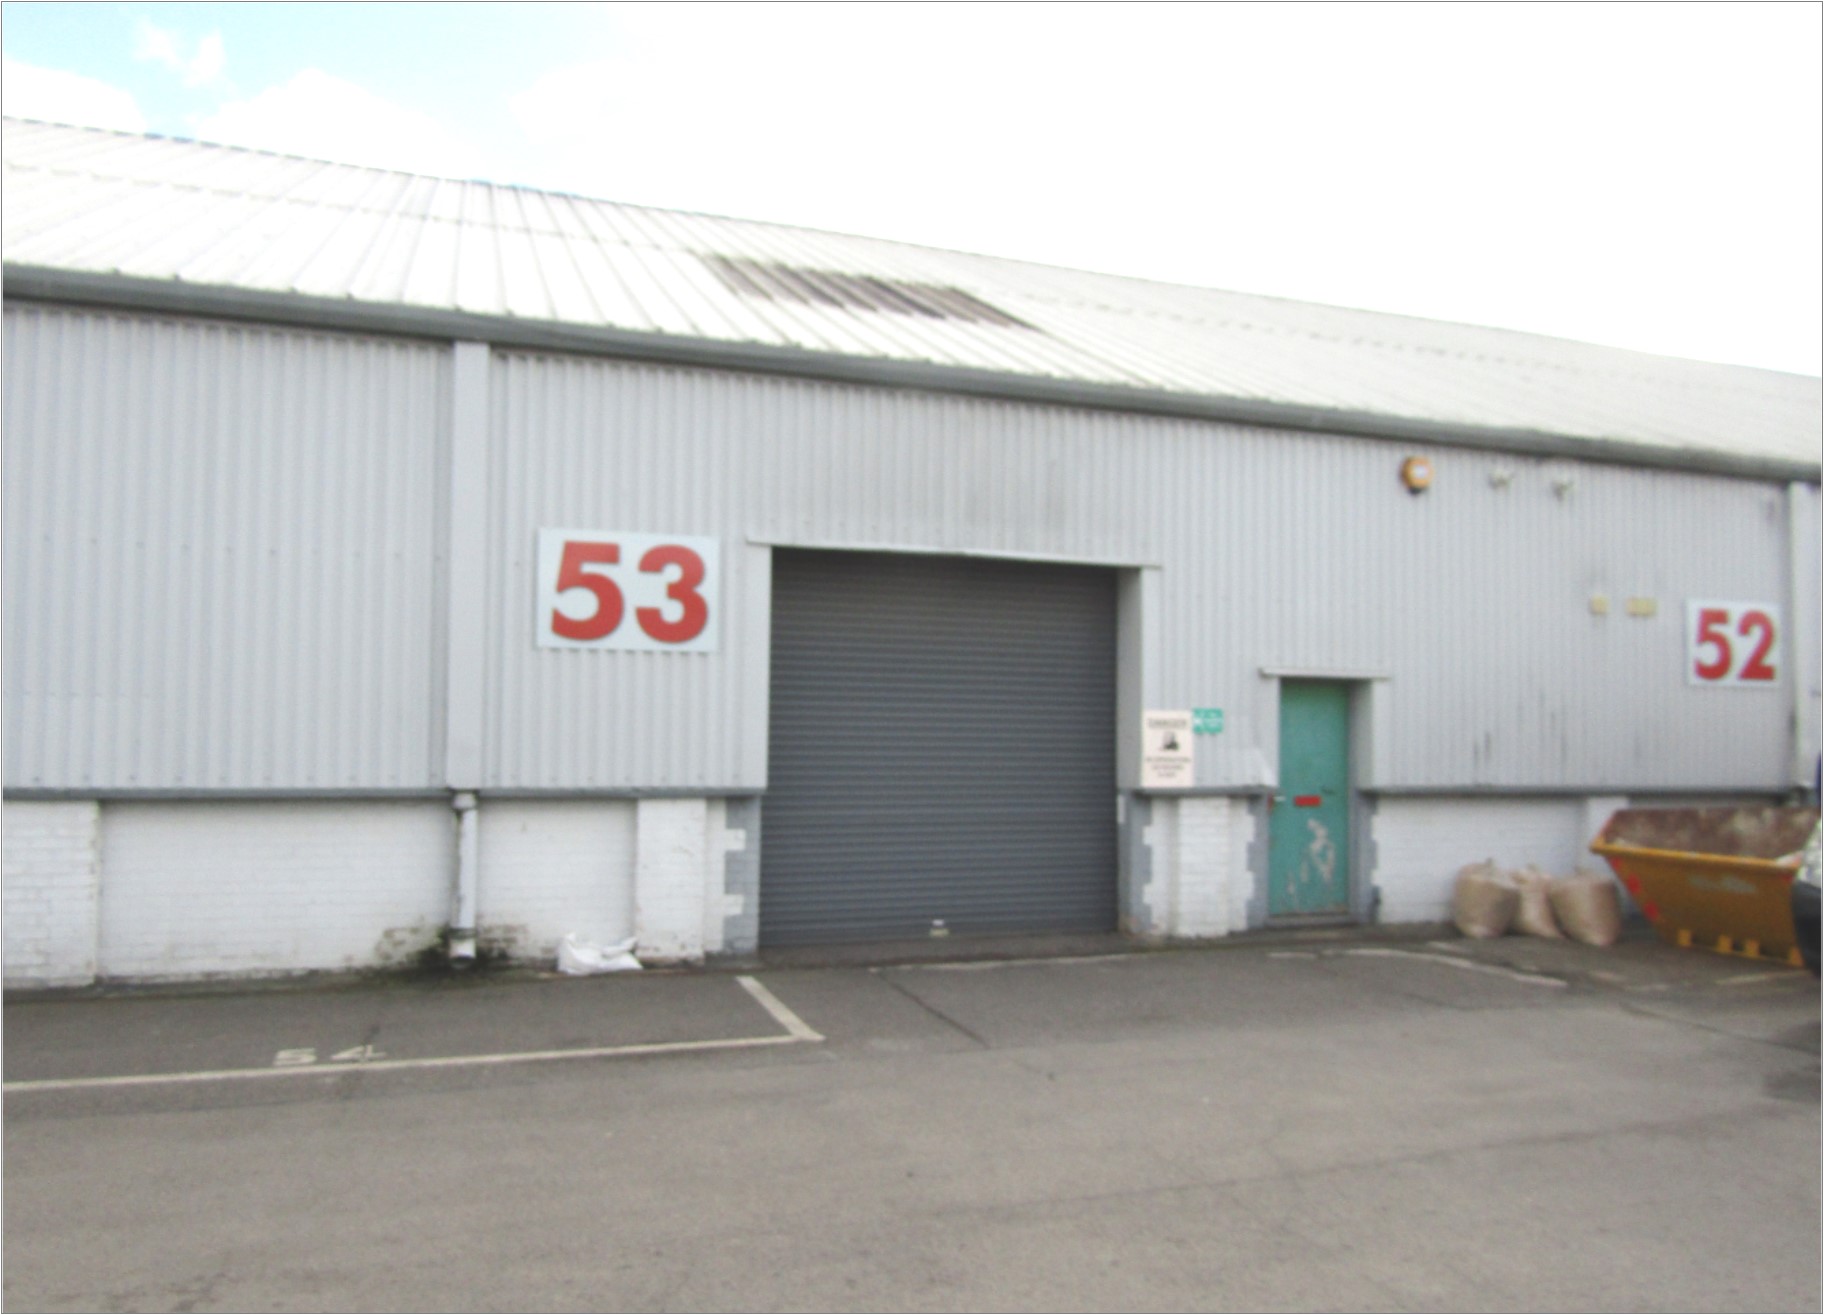 Unit 53, Hillgrove Business Park, Nazeing Road, Nazeing